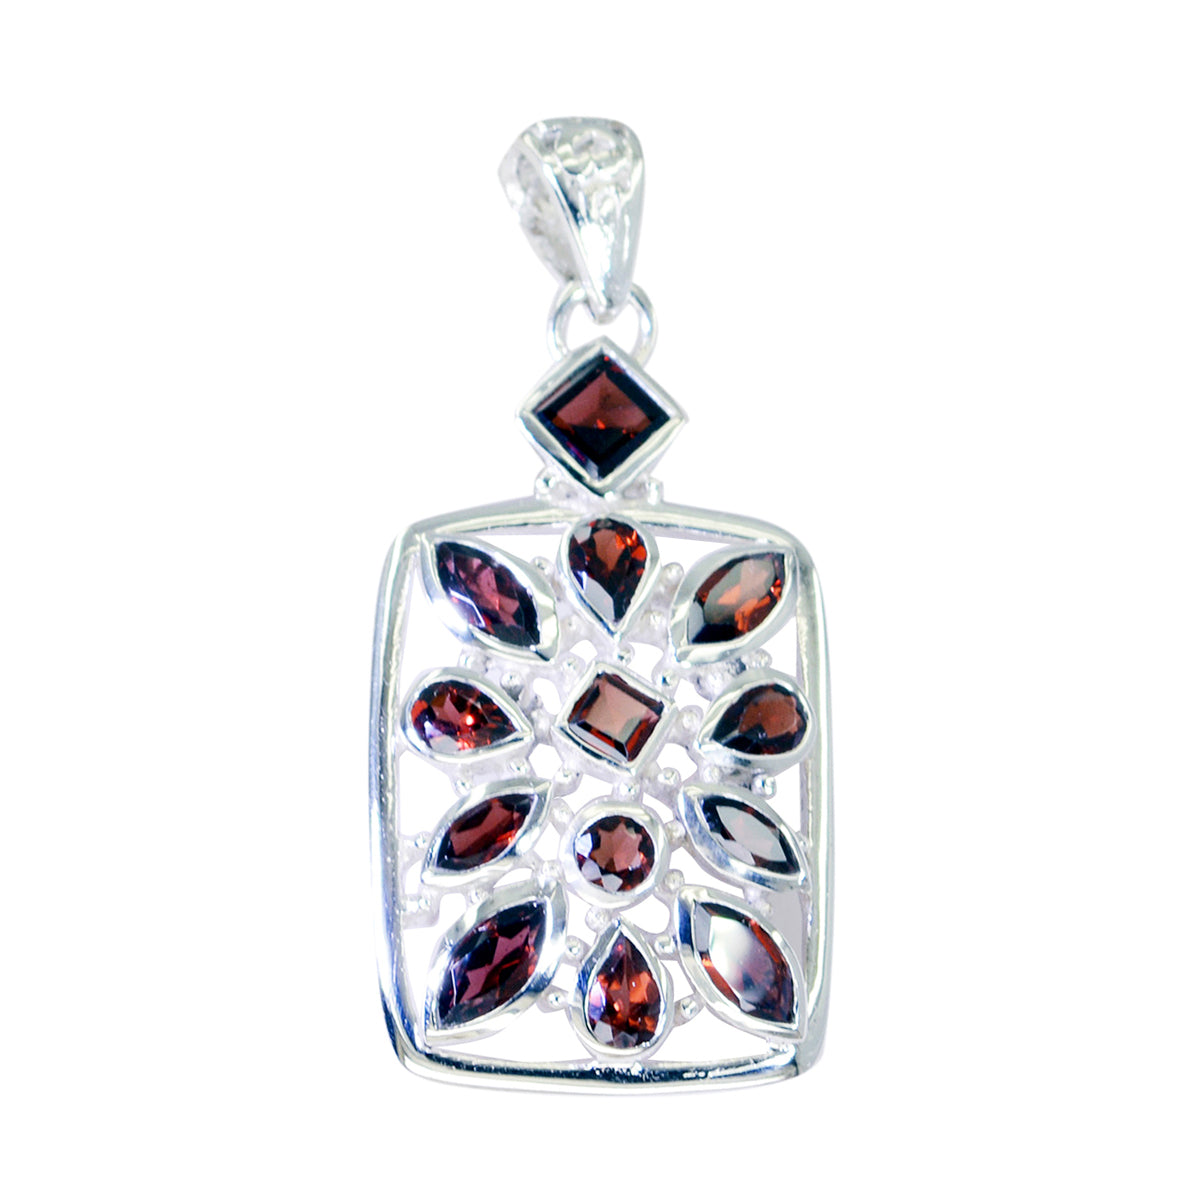 Riyo Foxy Gems Multi Faceted Red Garnet Solid Silver Pendant Gift For Anniversary